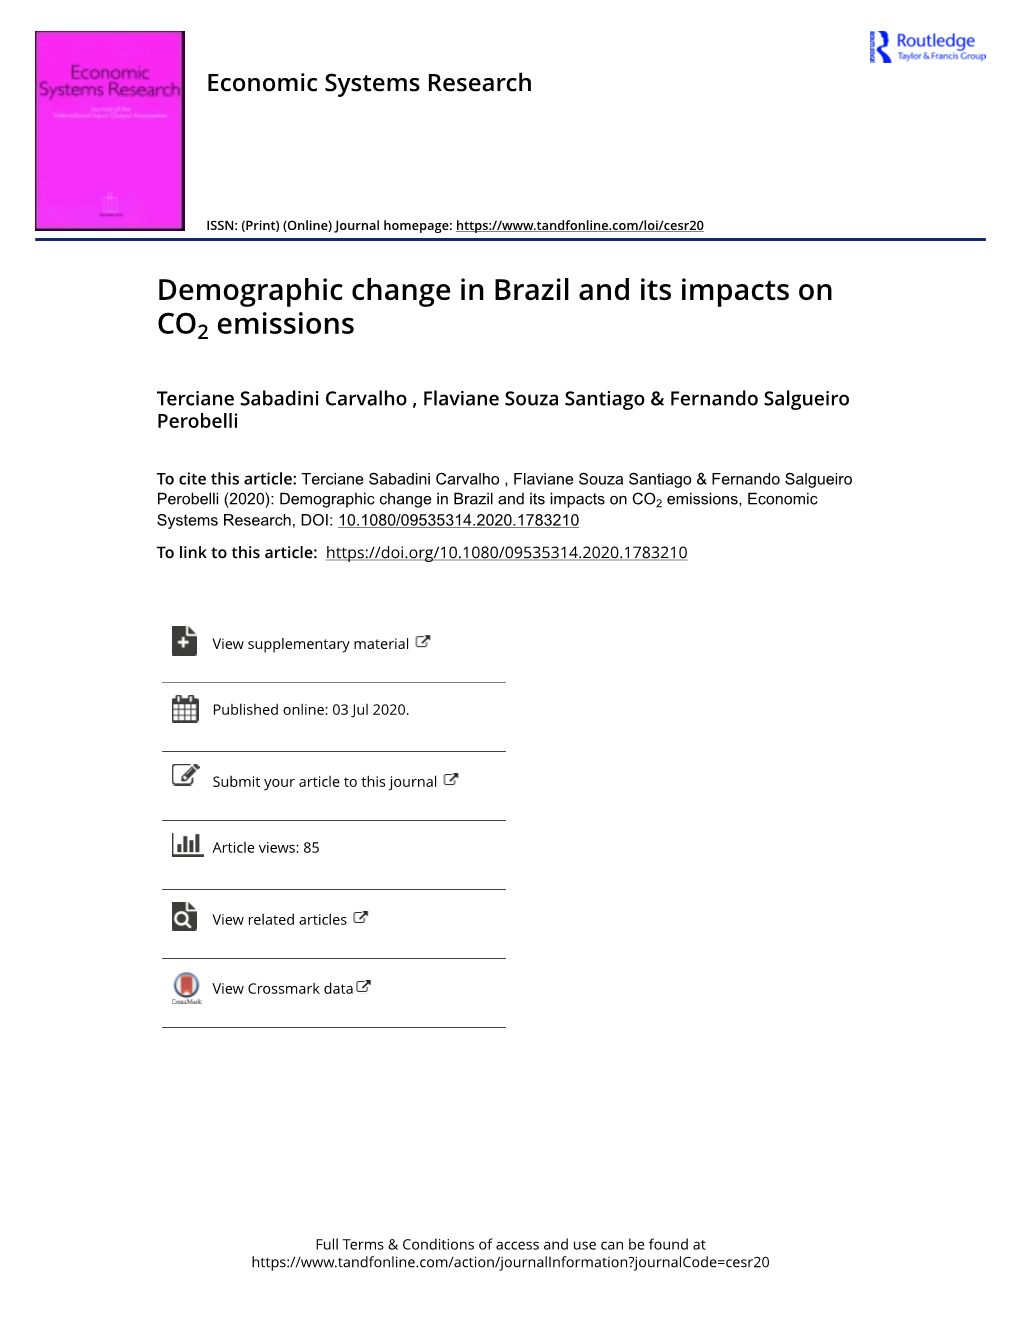 Demographic Change in Brazil and Its Impacts on CO2 Emissions